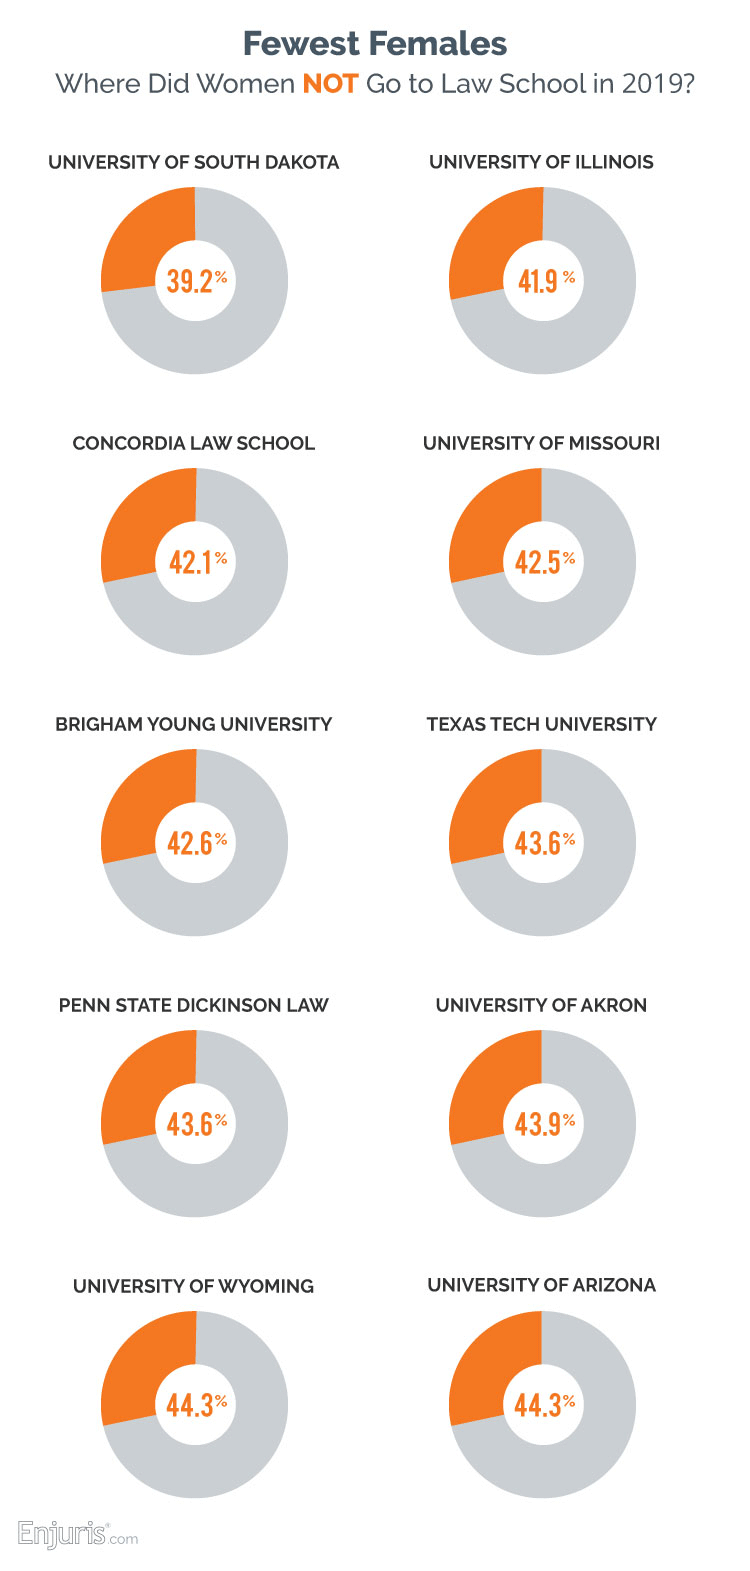 Where did women NOT go to law school in 2019?